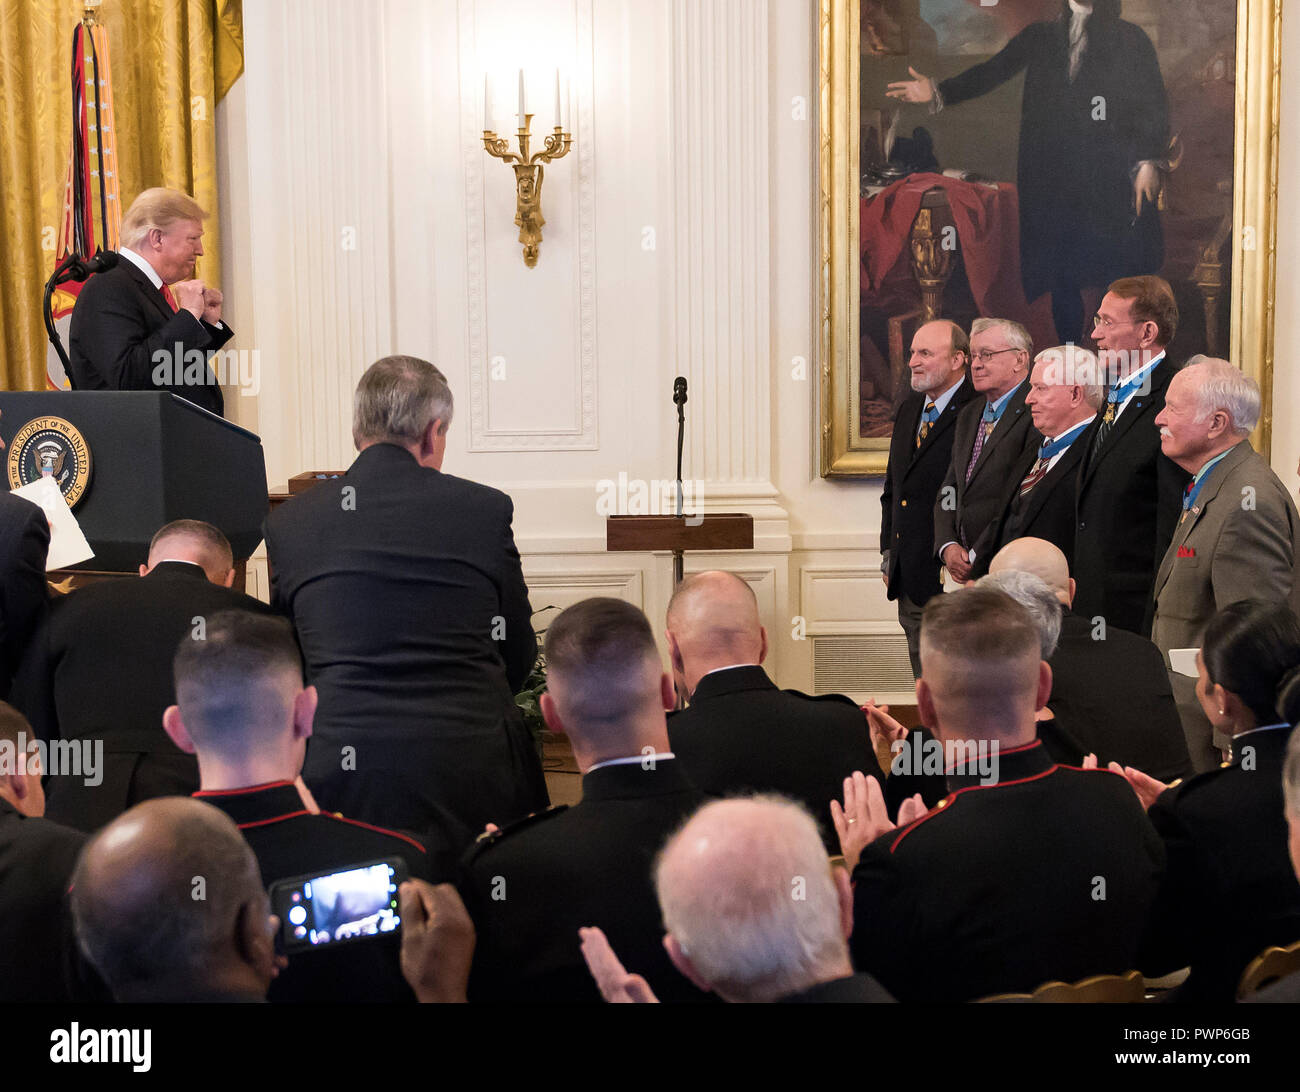 Washington, USA. 17th Oct 2018. United States President Donald J. Trump acknowledges previous recipients during the ceremony where he will award the Medal of Honor to Sergeant Major John L. Canley, United States Marine Corps (Retired), for conspicuous gallantry during the Vietnam War in a ceremony in the East Room of the the White House in Washington, DC on Wednesday, October 17, 2018. Credit: Ron Sachs/CNP/MediaPunch Credit: MediaPunch Inc/Alamy Live News Stock Photo